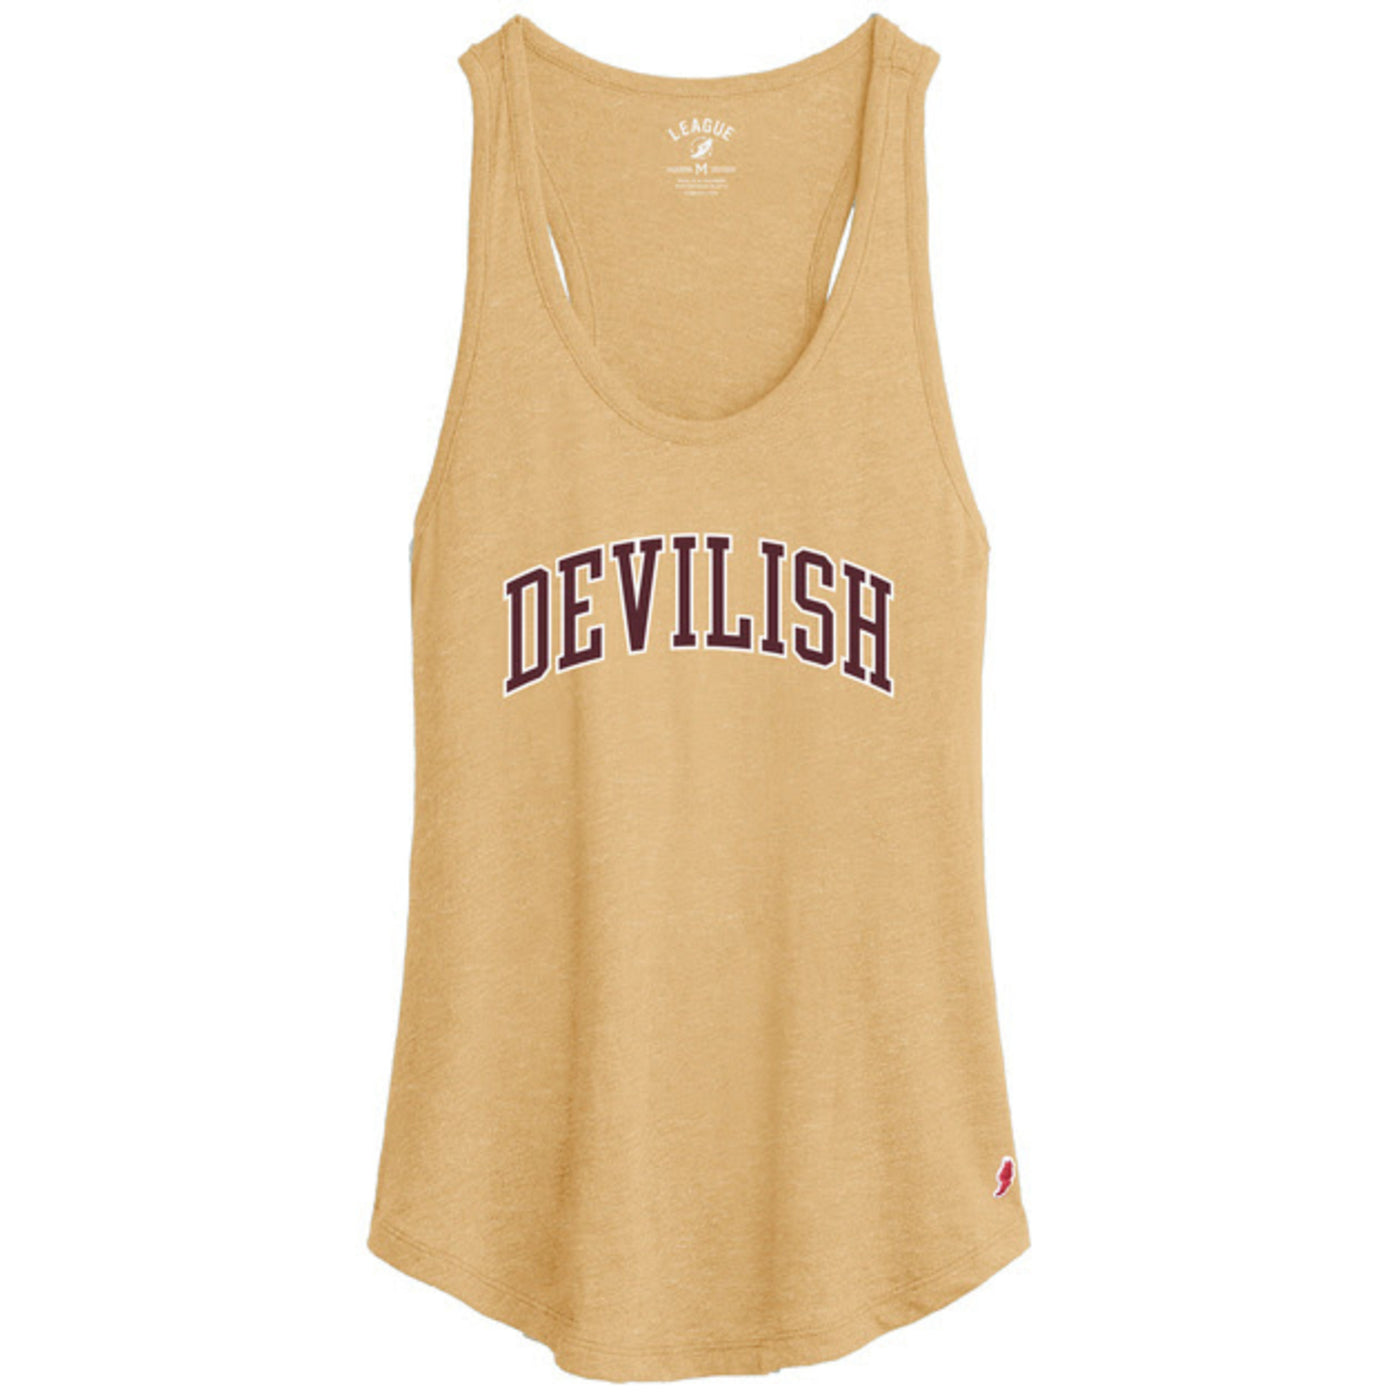 ASU gold women's tank with the text 